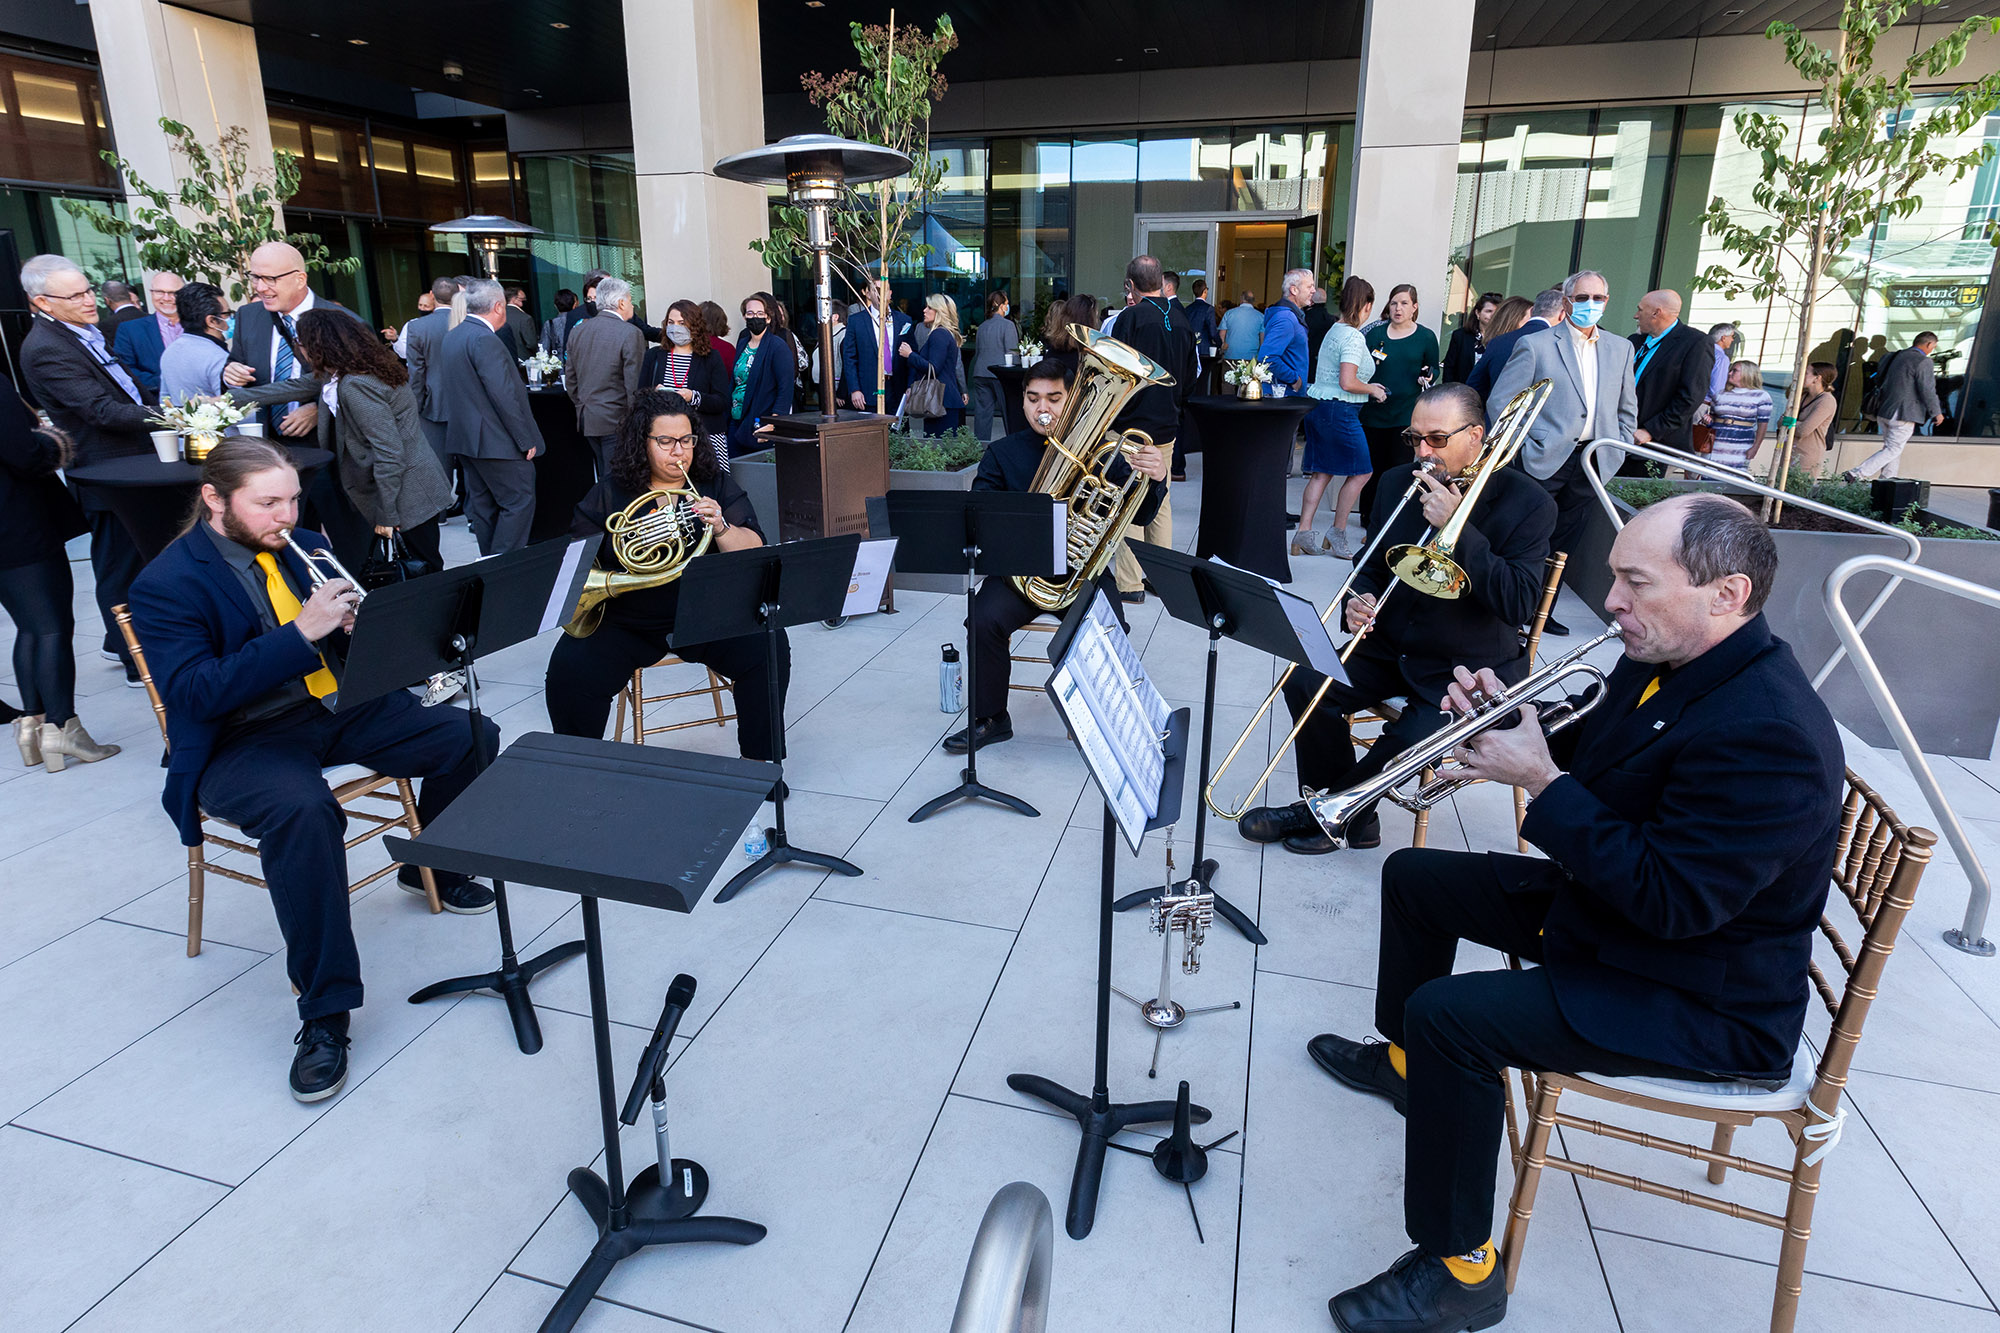 a brass quartet plays music outside at the event